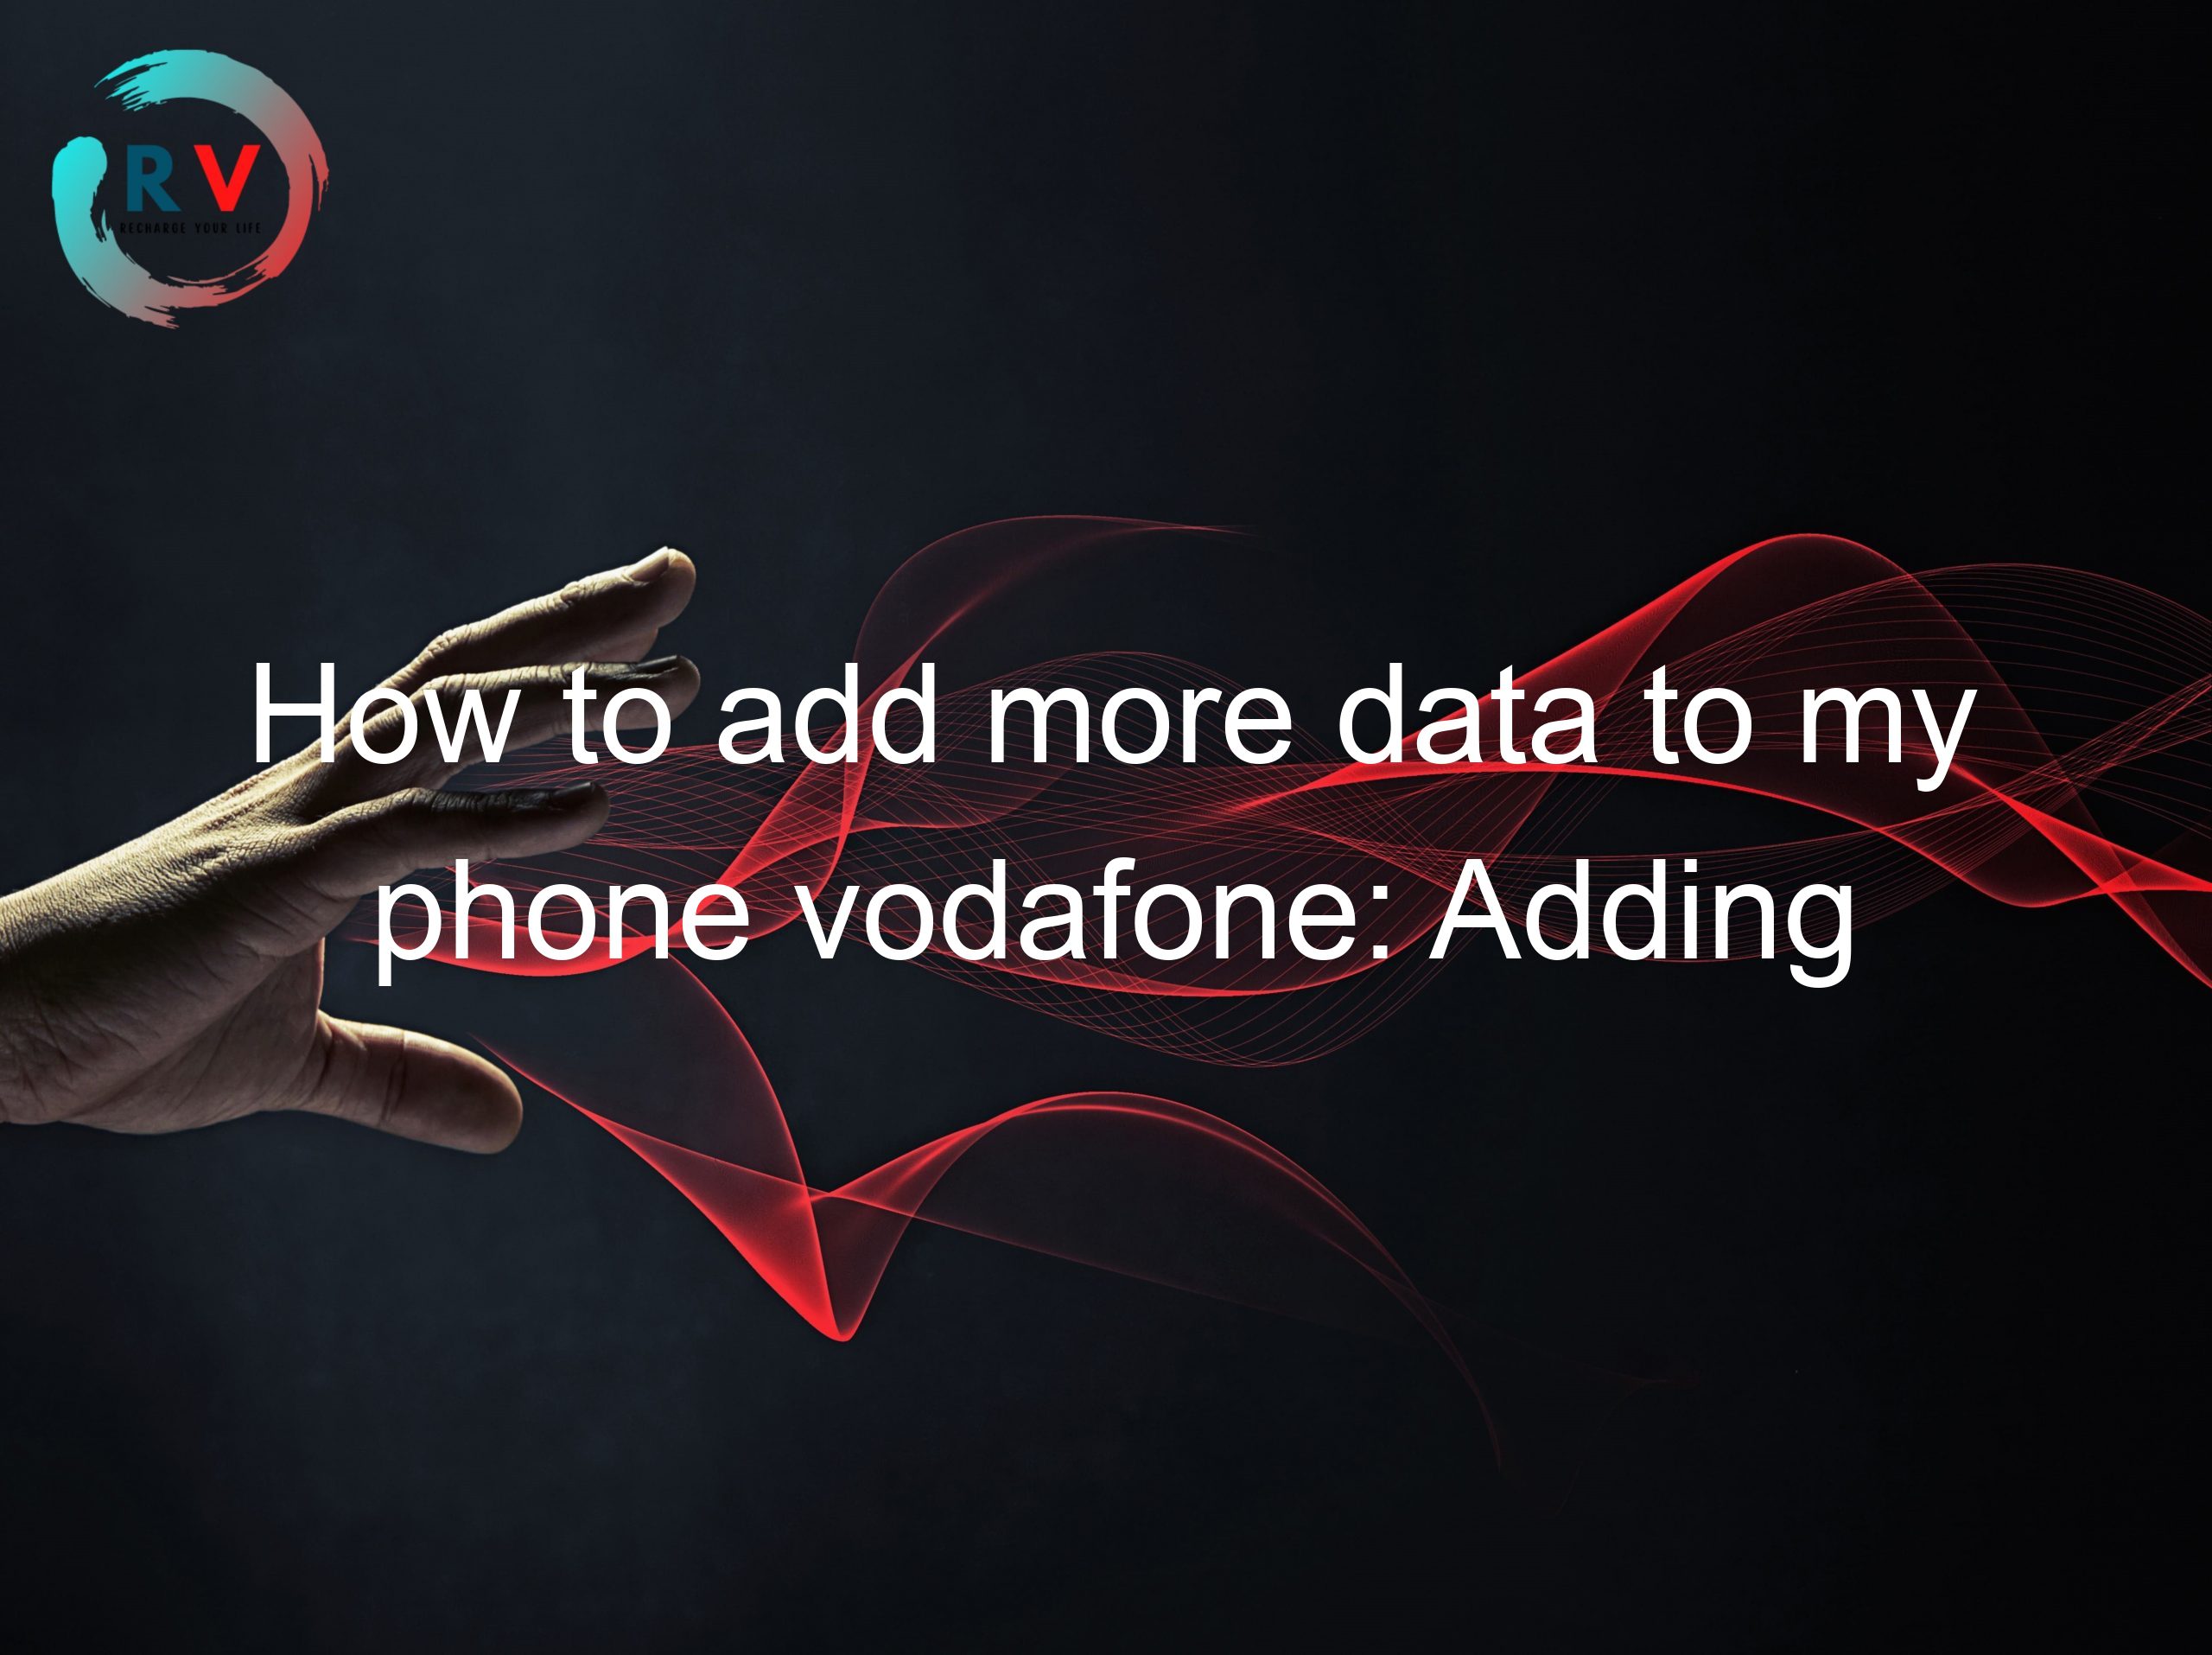 How to add more data to my phone vodafone: Adding more data to your phone Vodafone is easy and can be done in a few steps!